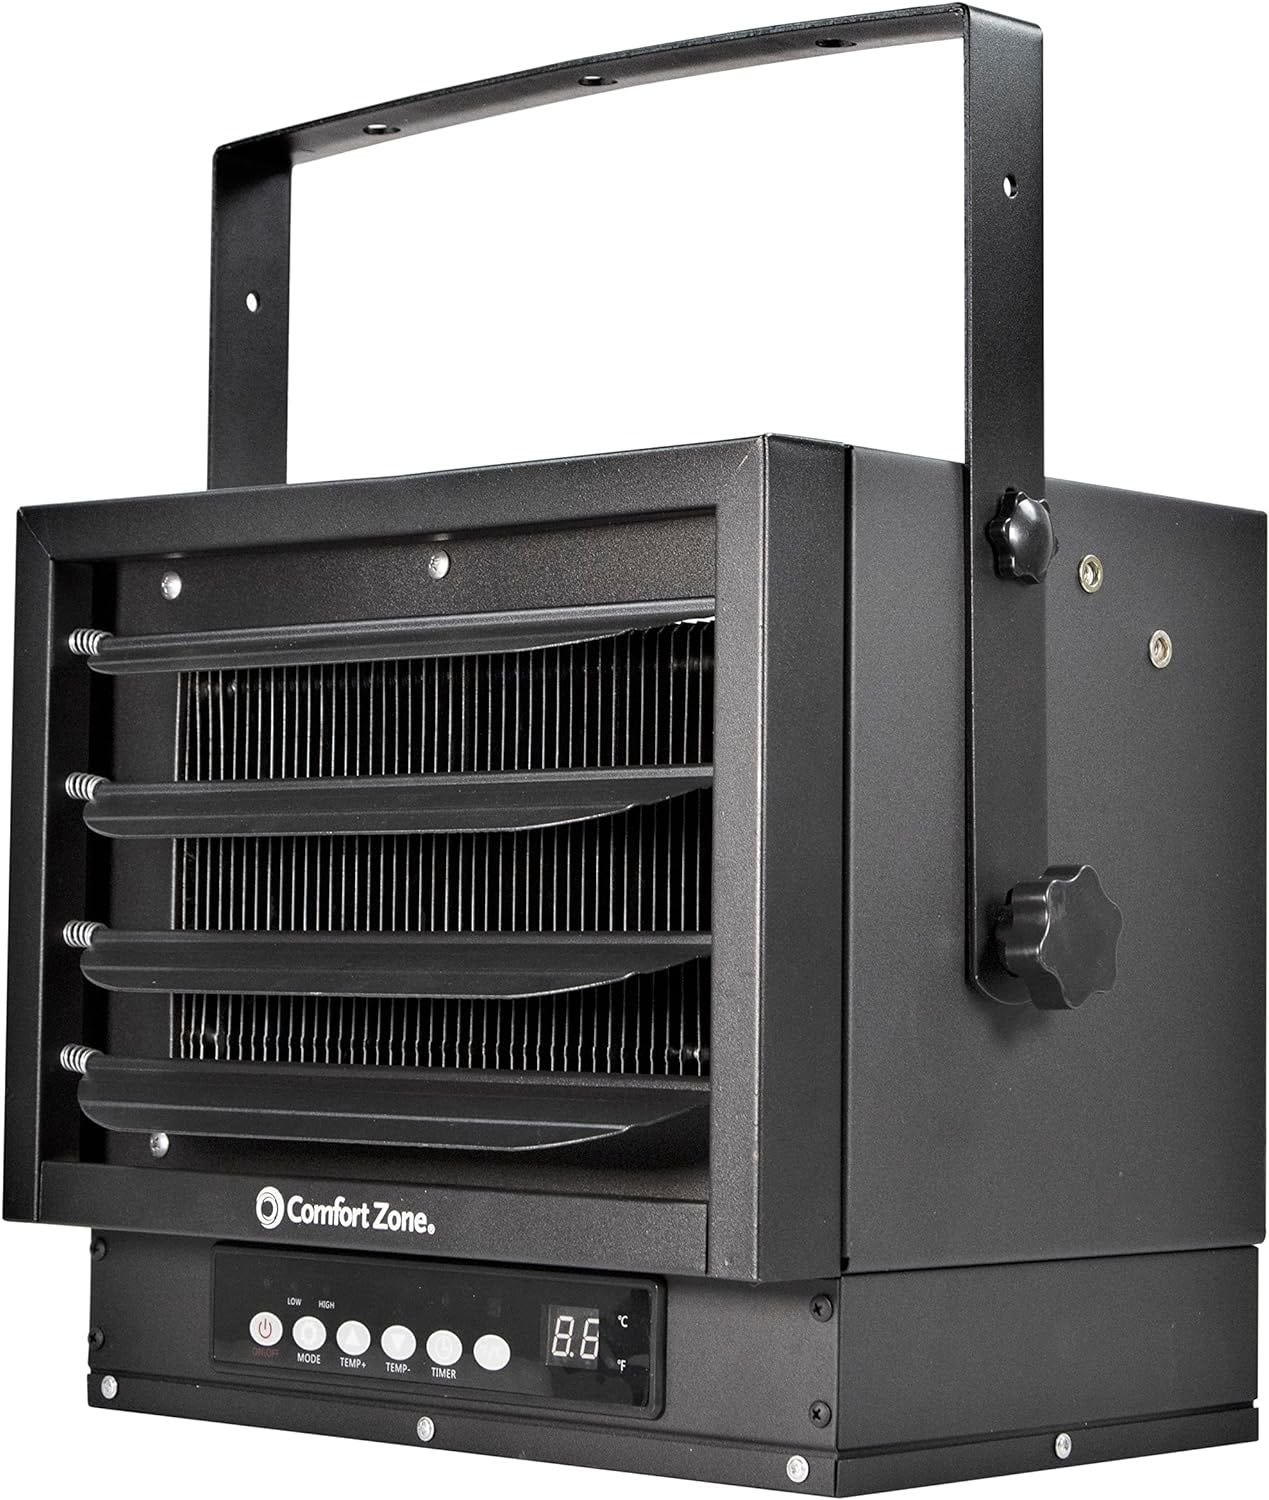 A black electric heater with a handle

Description automatically generated